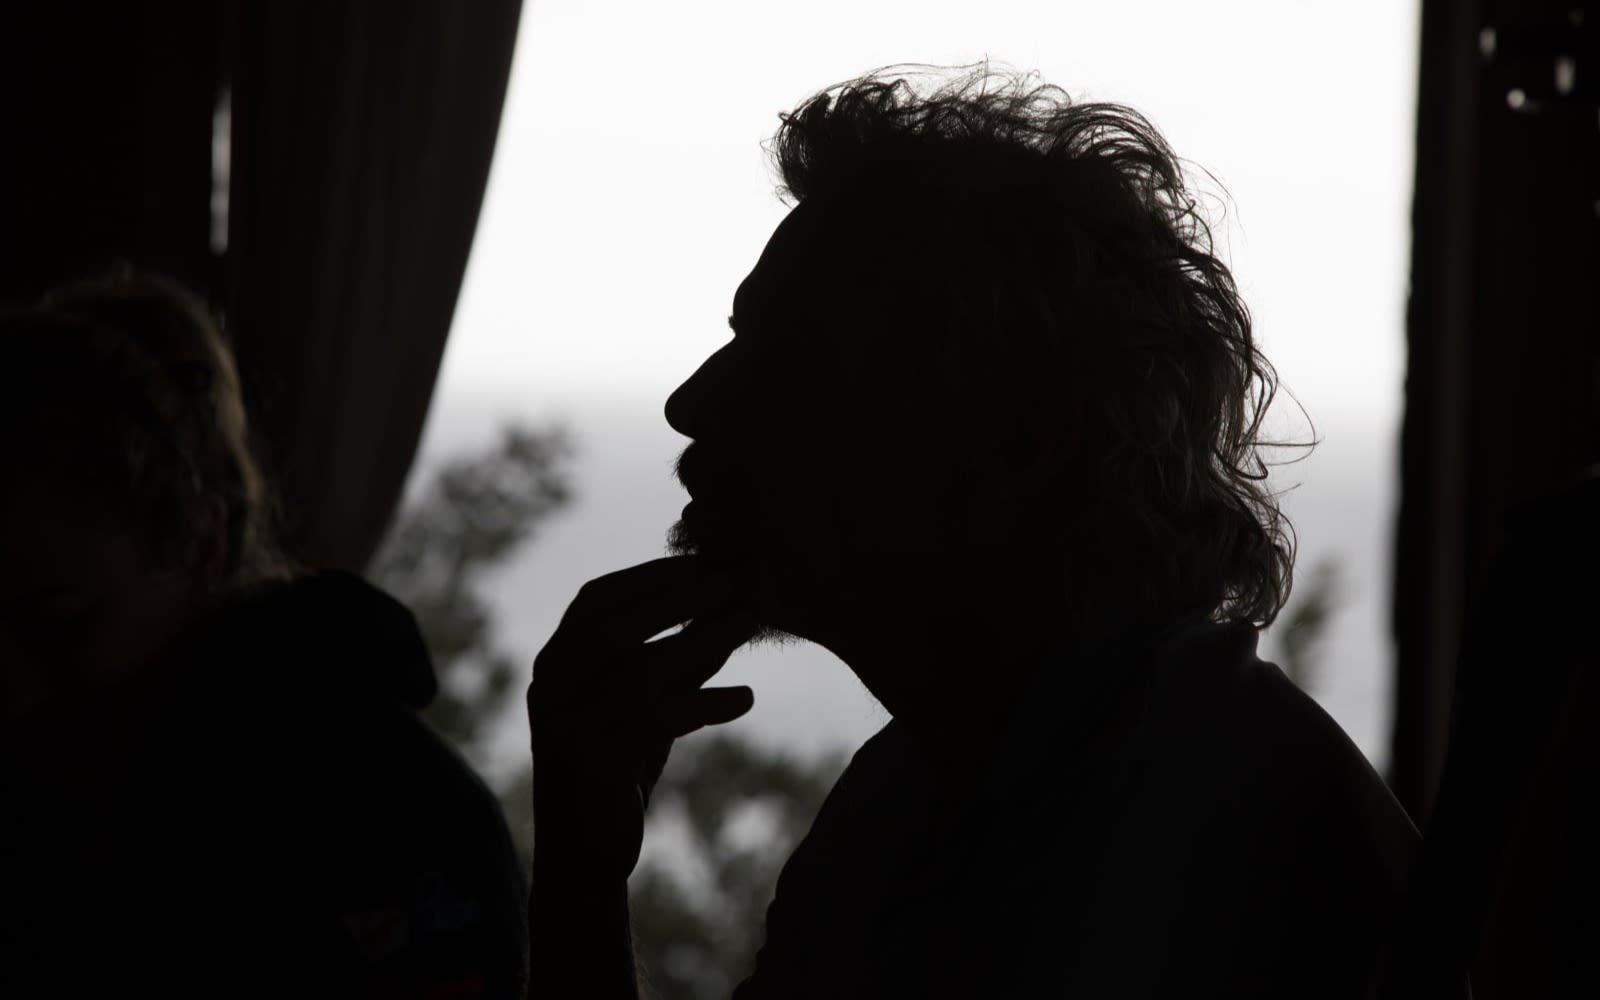 Silhouette of Richard Branson in a pensive state